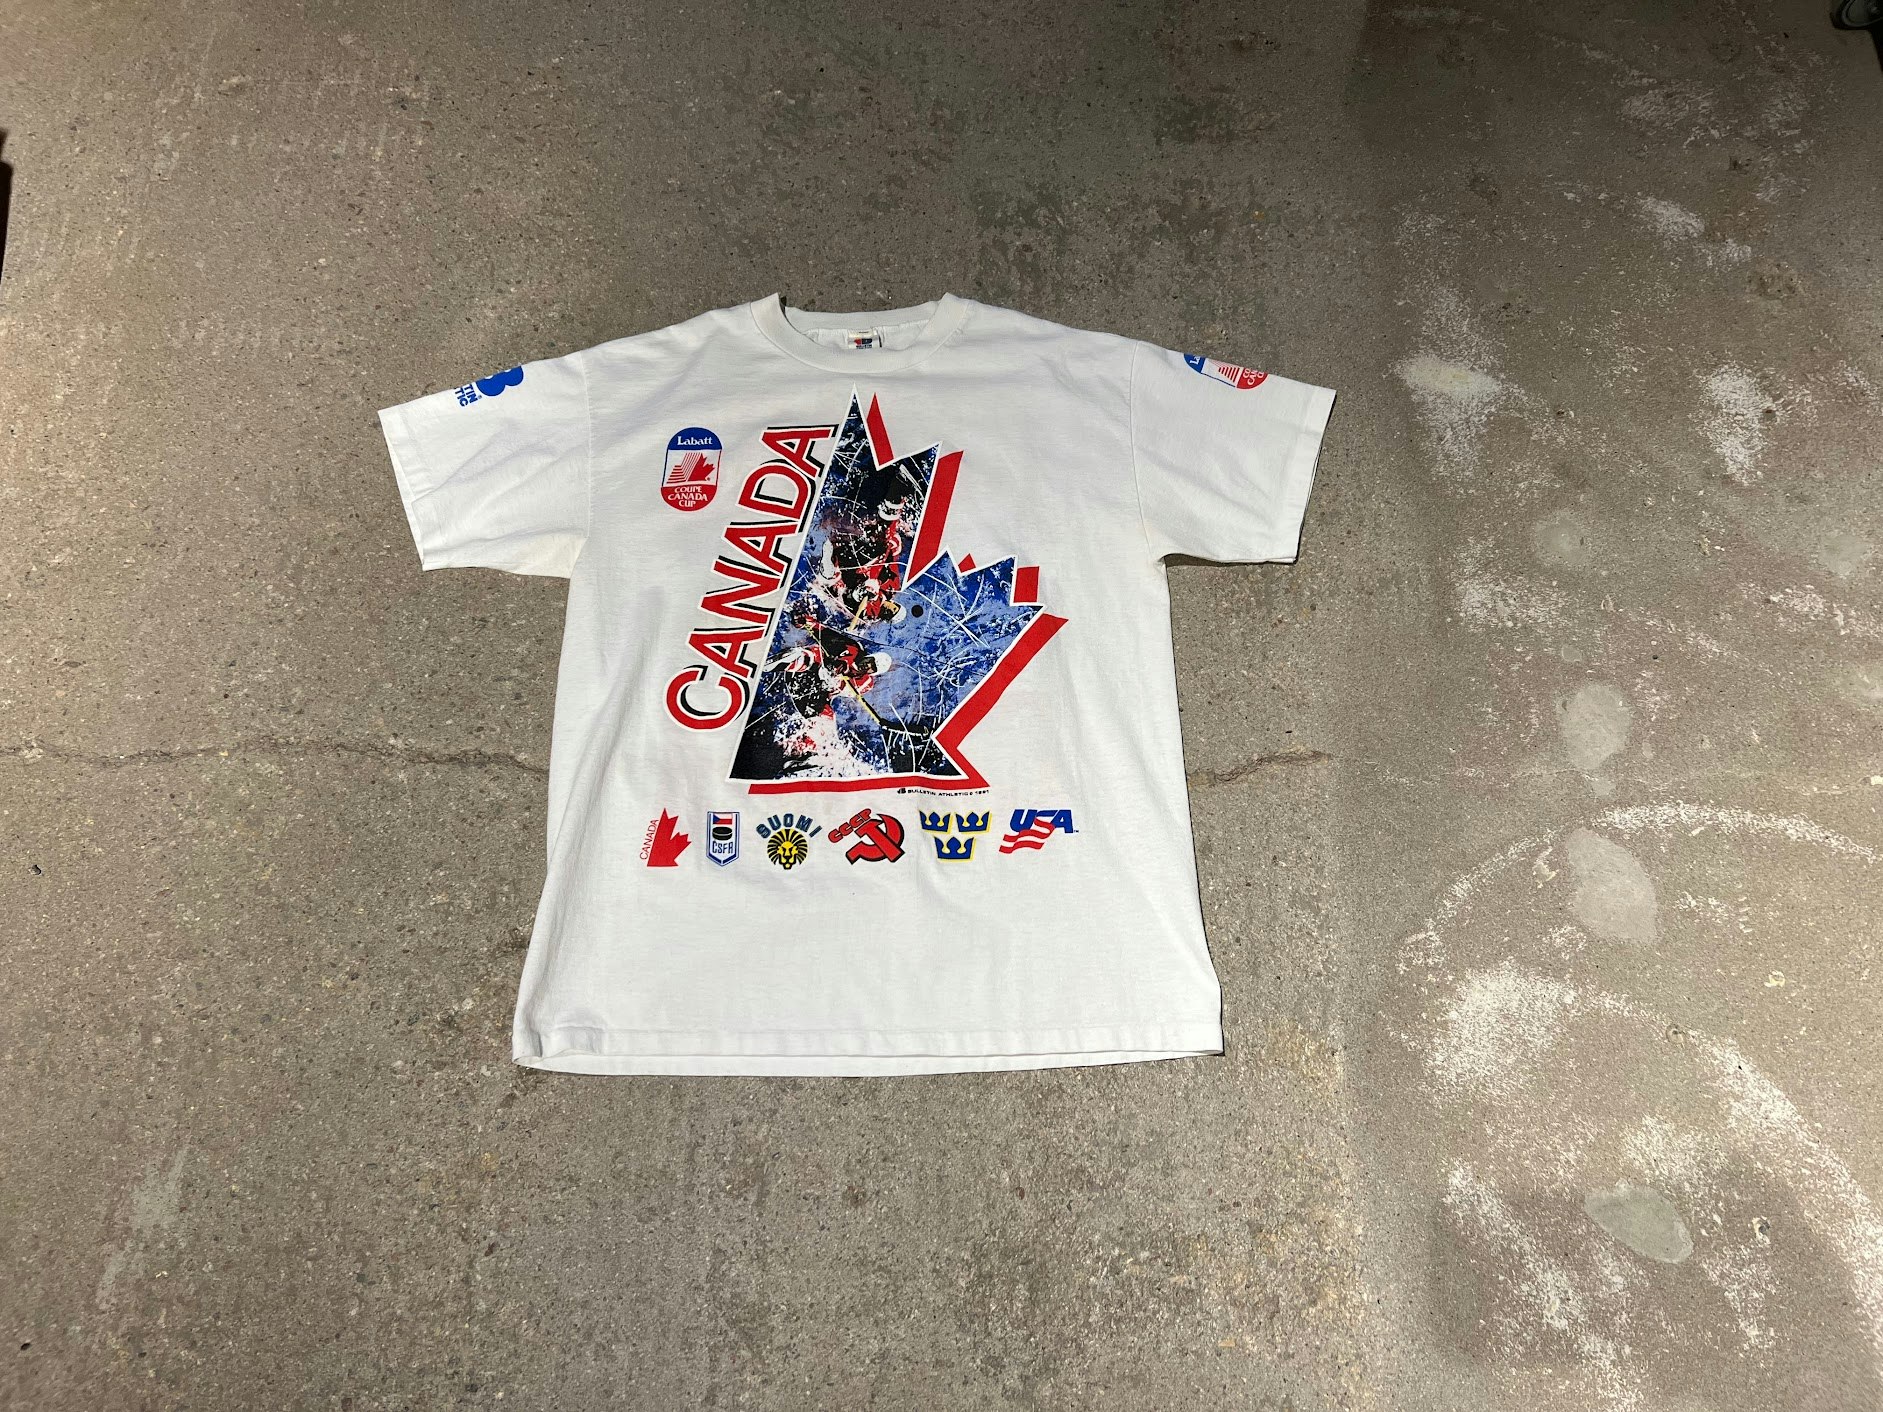 Canada Cup 1991 - Vintage T-shirt